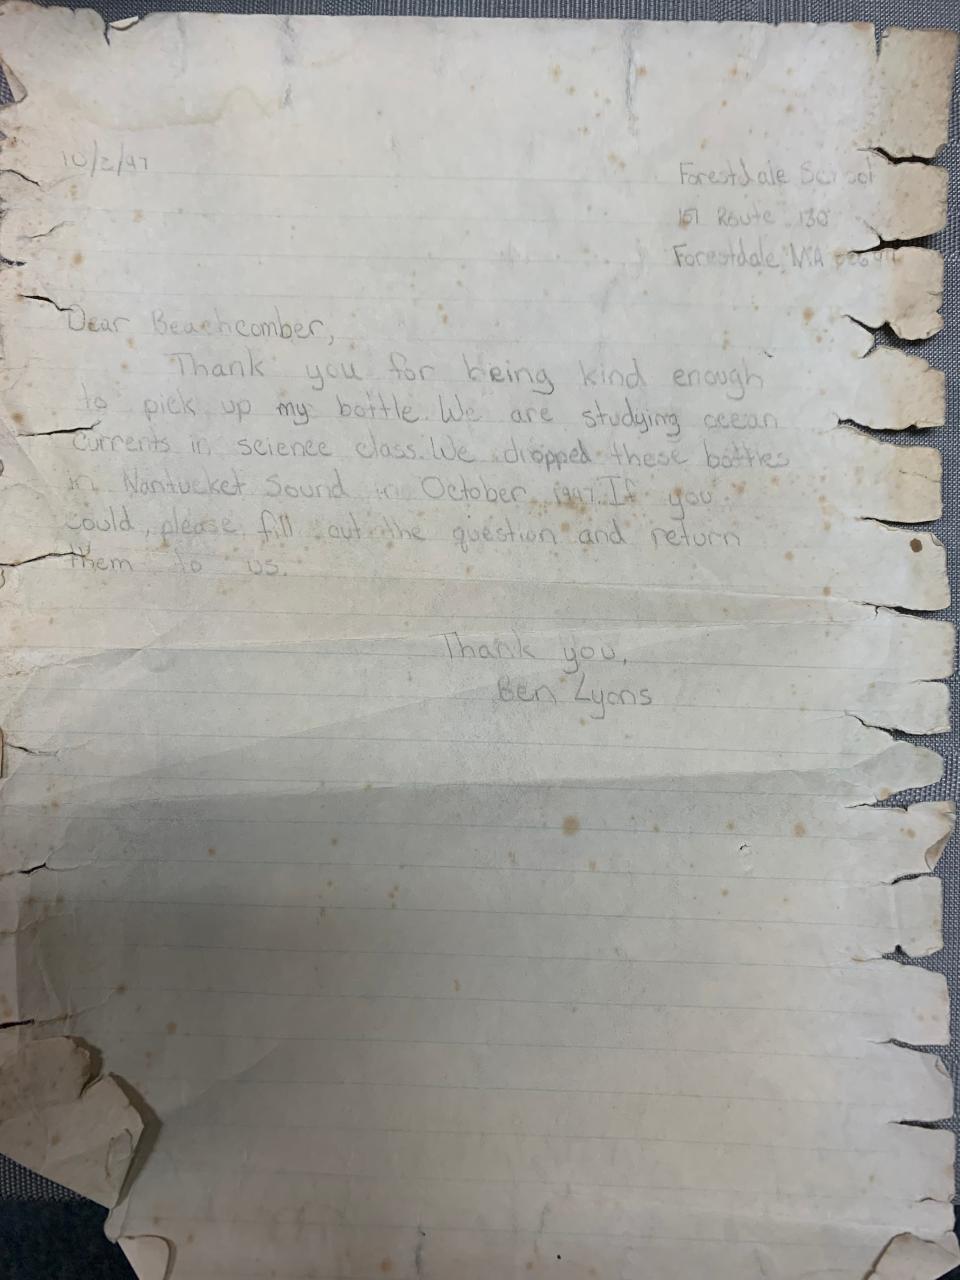 It was 1997 when Ben Lyons, a student in Frederic Hemmila's class at the Forestdale School, penciled a note that began, "Dear Beachcomber, Thank you for being kind enough to pick up my bottle."